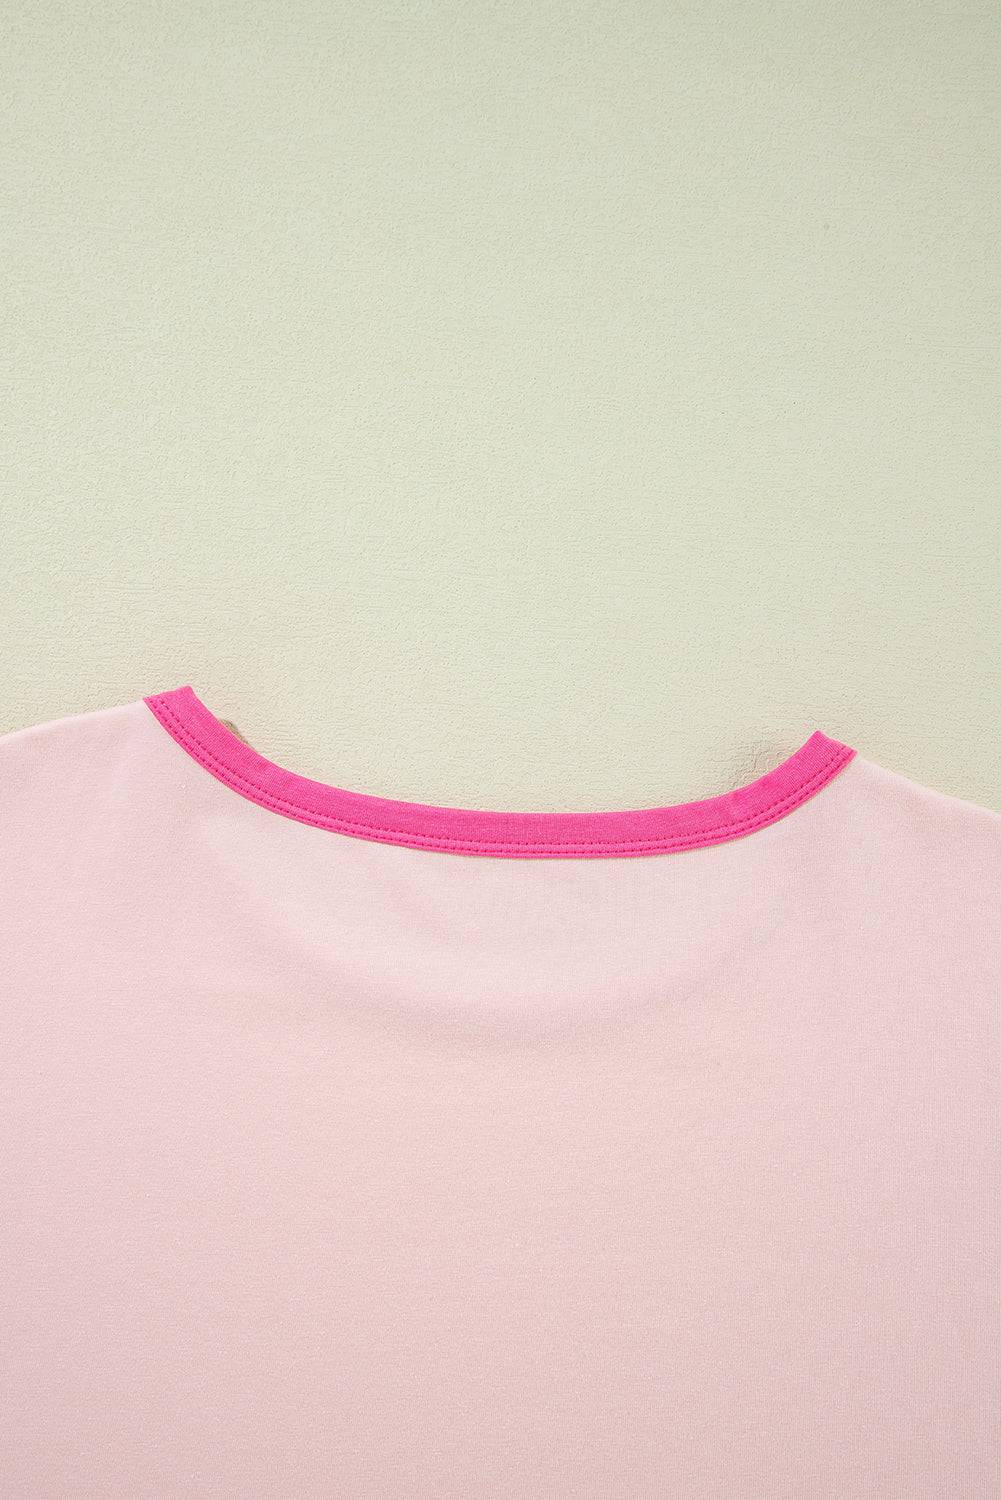 a pink shirt hanging on a wall